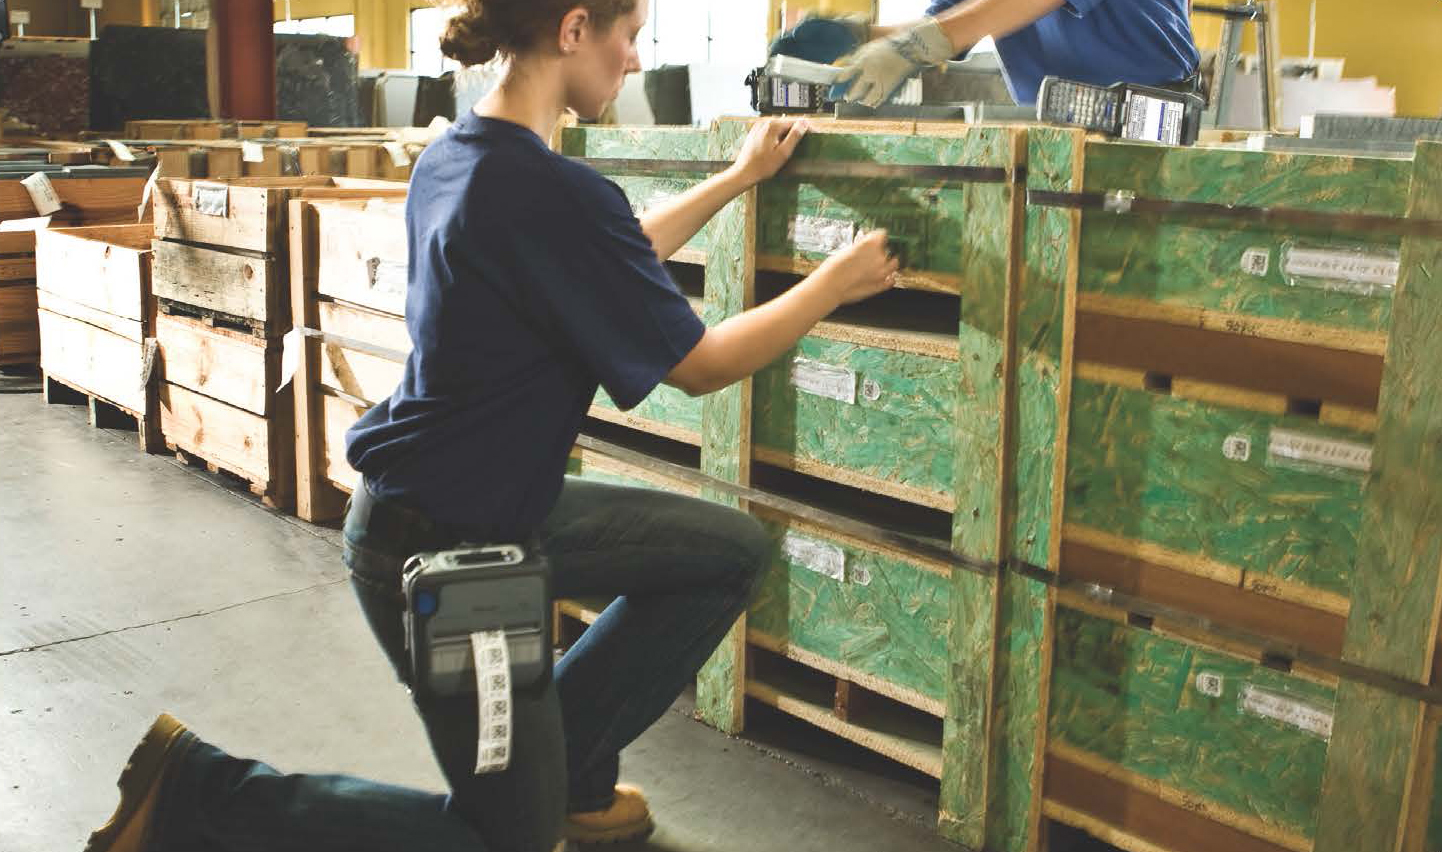 Mobile Labeling in the Warehouse or Manufacturig Facility